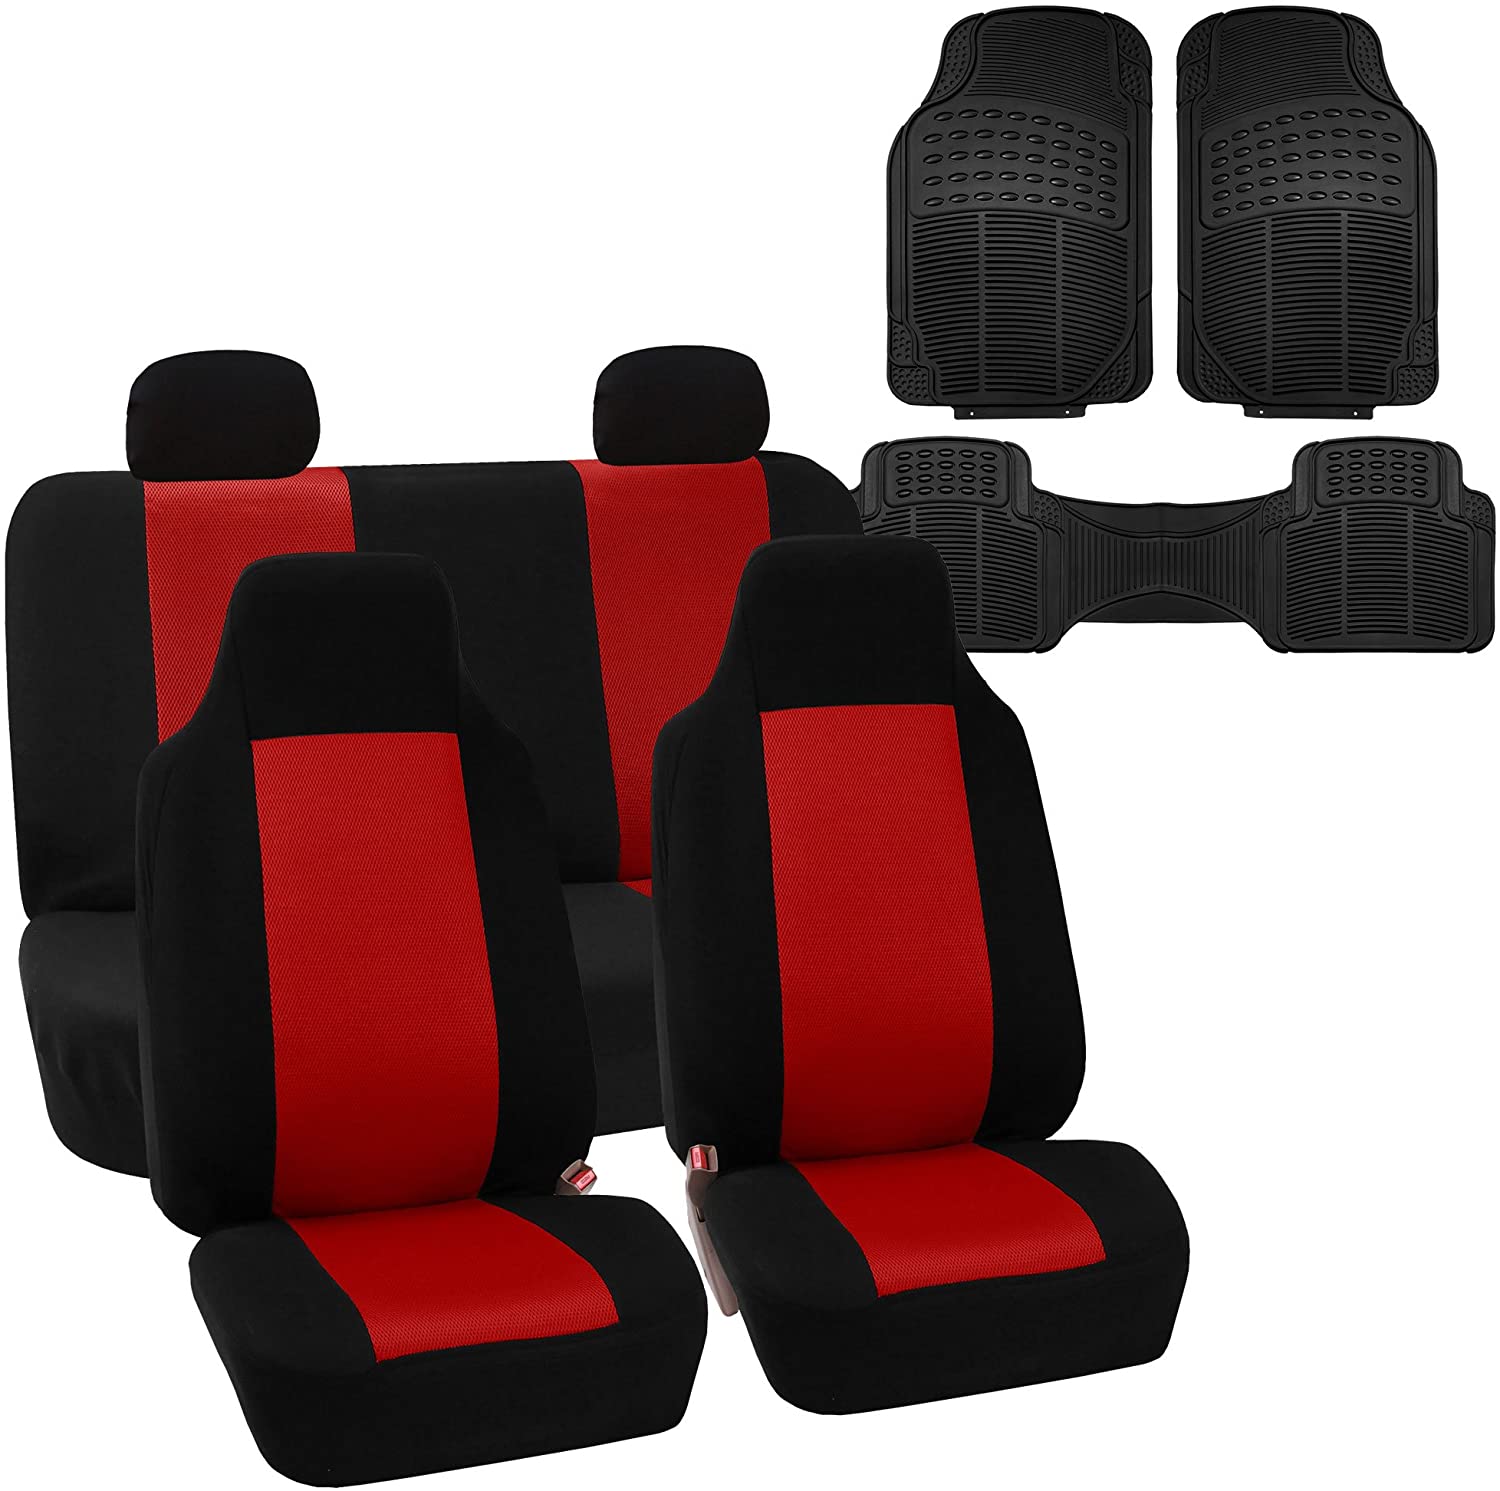 FH Group FH-FB102114 Full Set Classic Cloth Car Seat Covers Red/Black Color with F11306 Vinyl Floor Mats- Fit Most Car, Truck, SUV, or Van (Red)